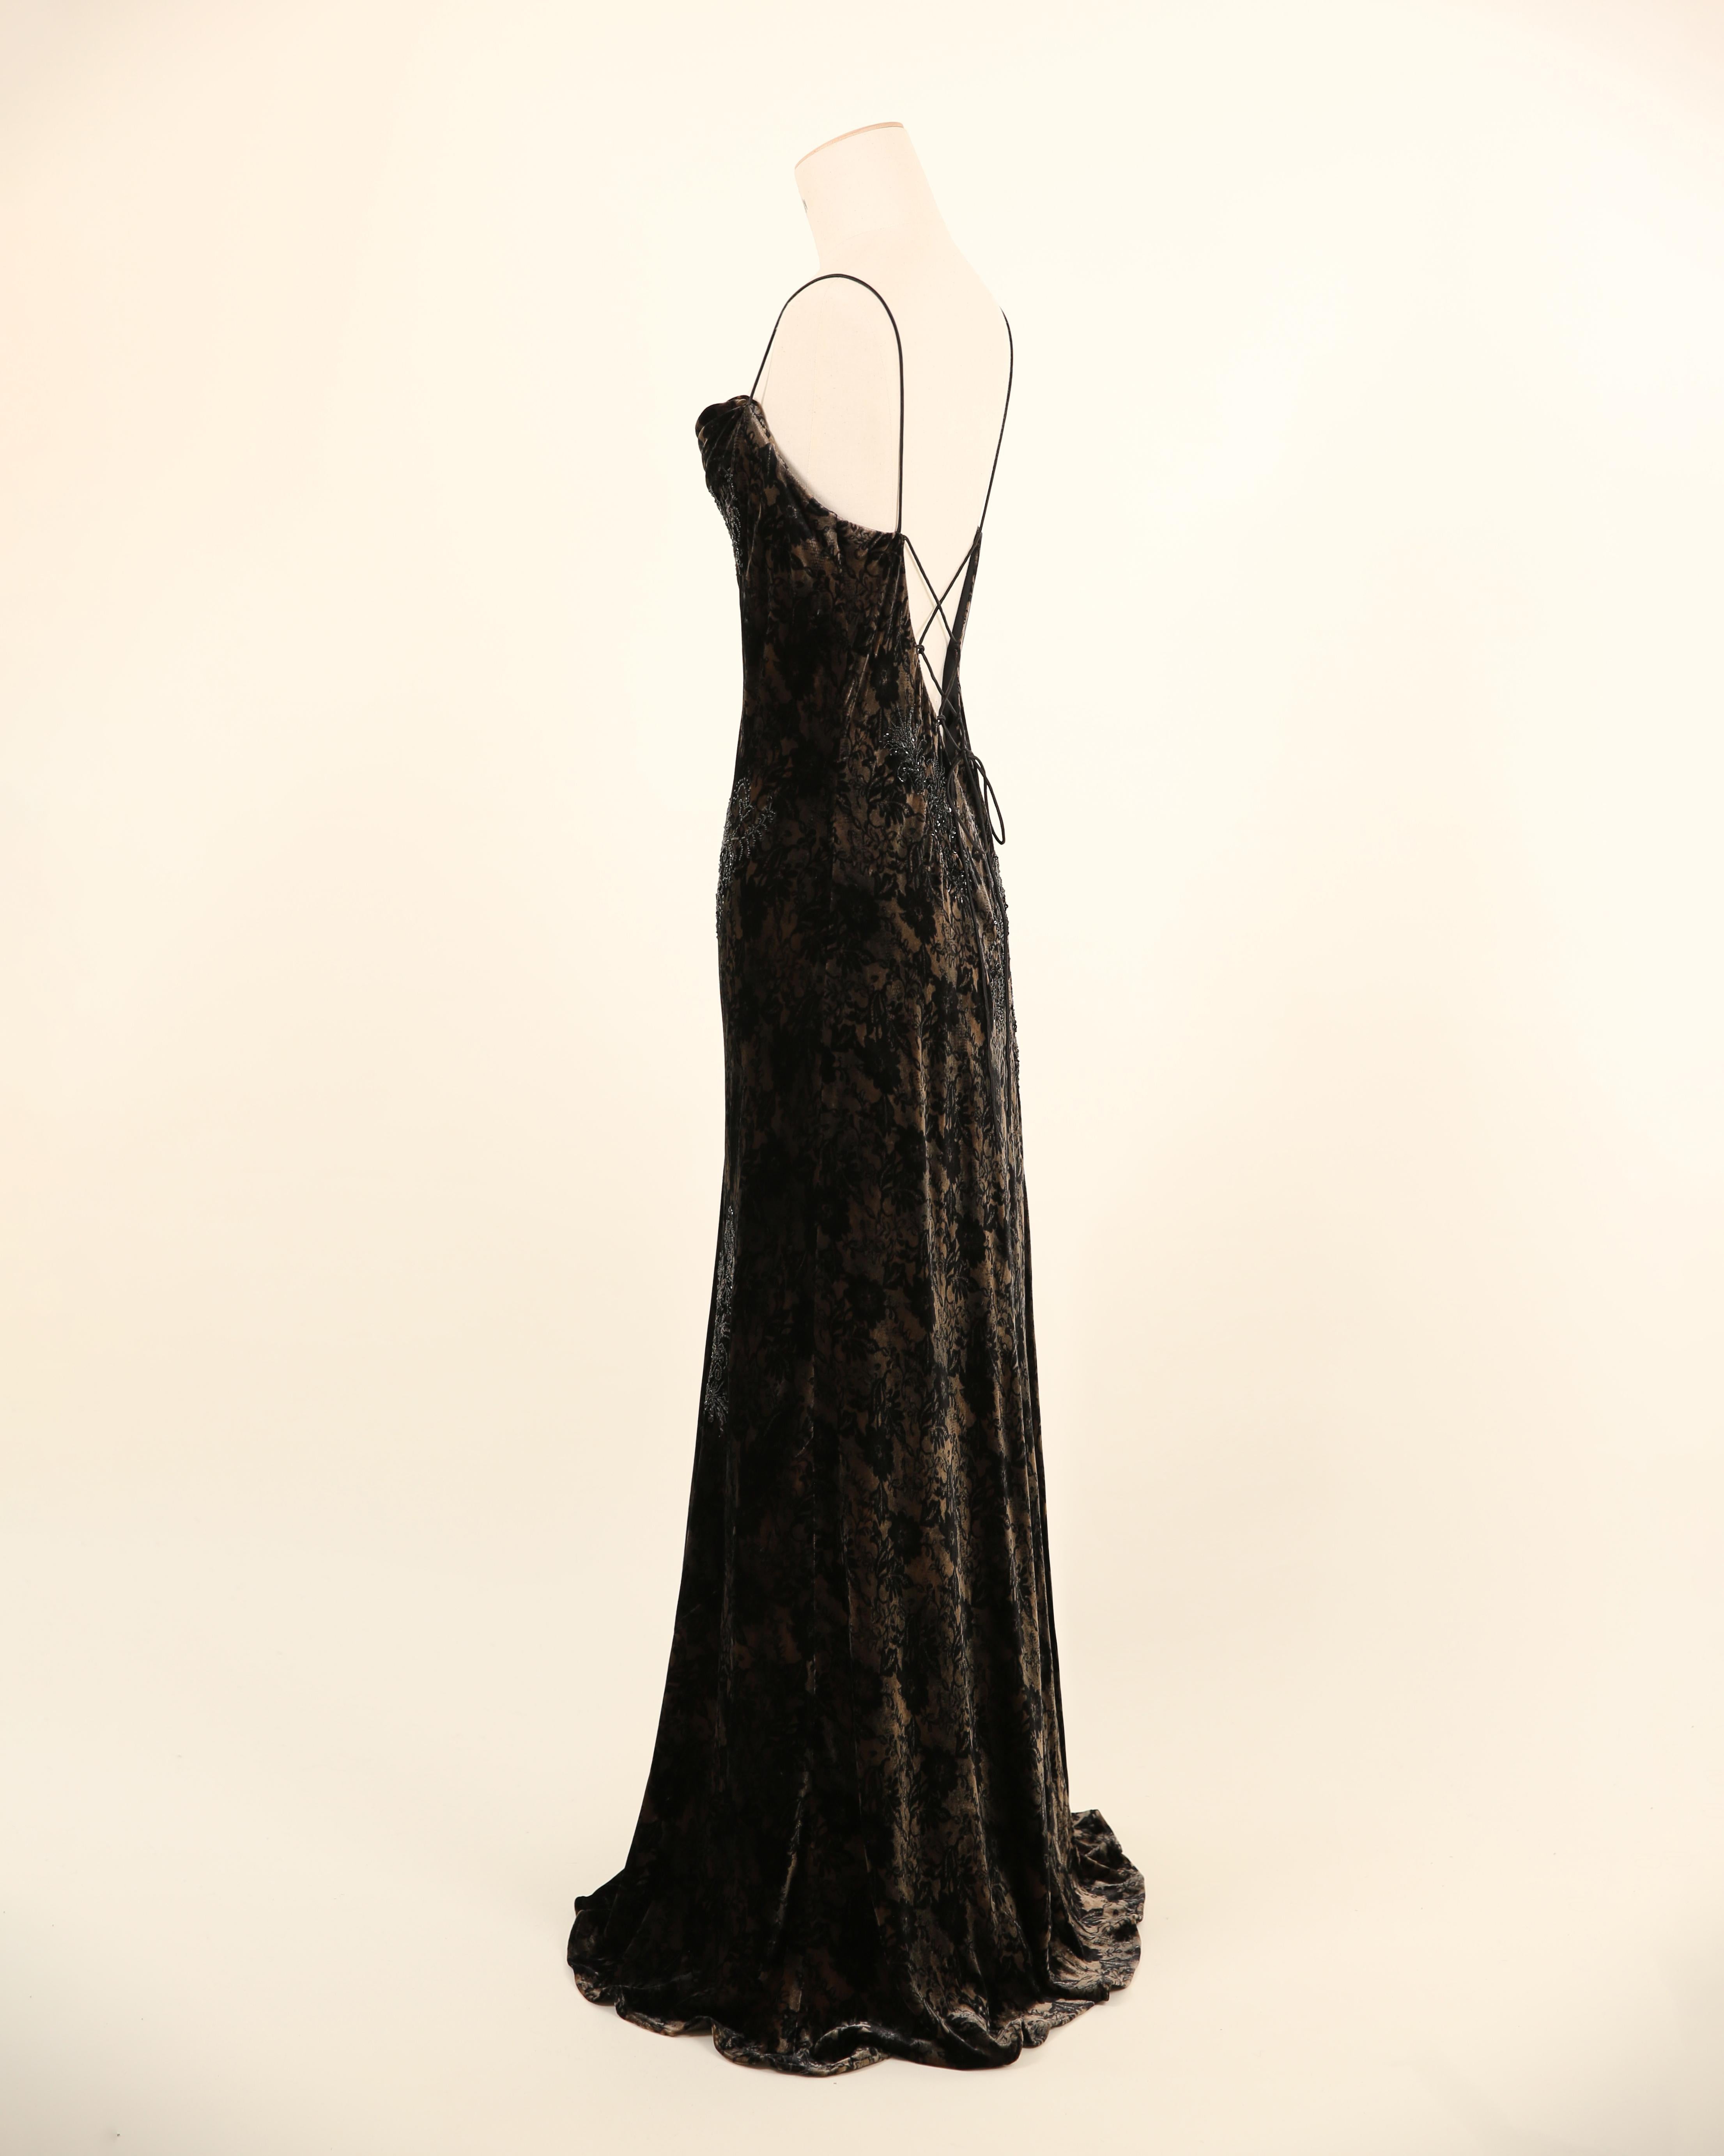 LOVE LALI VINTAGE

This is an absolutely beautiful vintage find, I would estimate from around the late 90's. A floor length floral velvet gown that cut on the bias it fits the body beautifully, skimming all the curves in just the right places. The